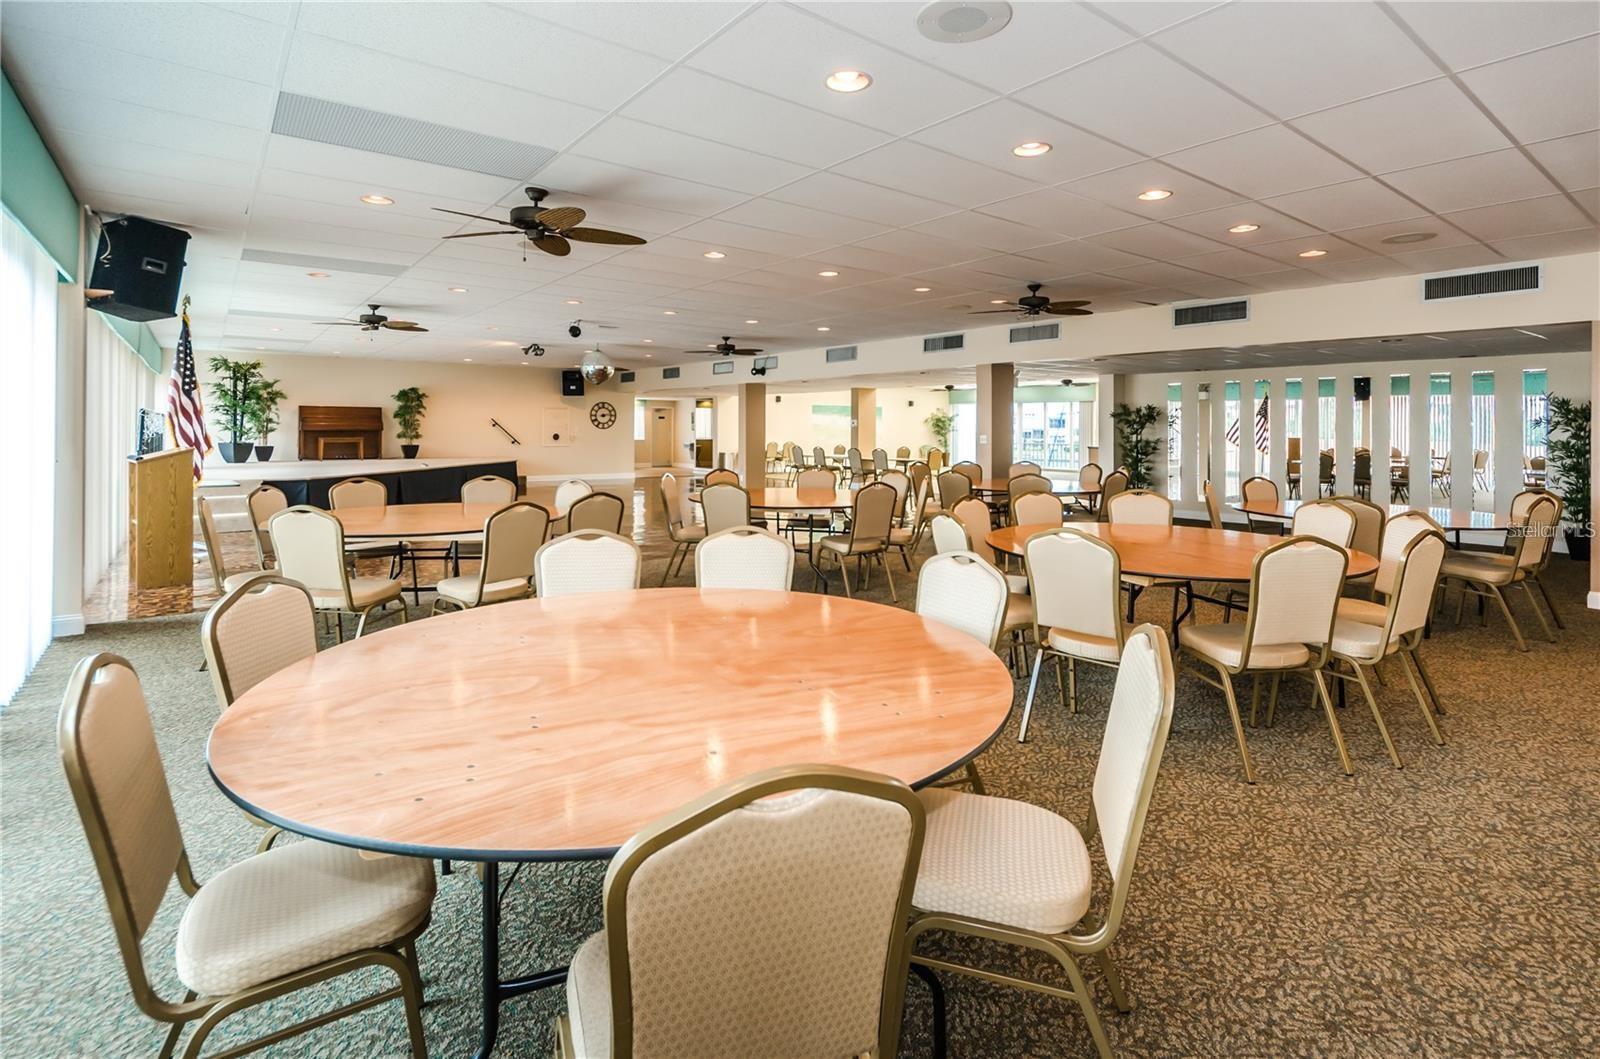 Banquet room of the Clubhouse